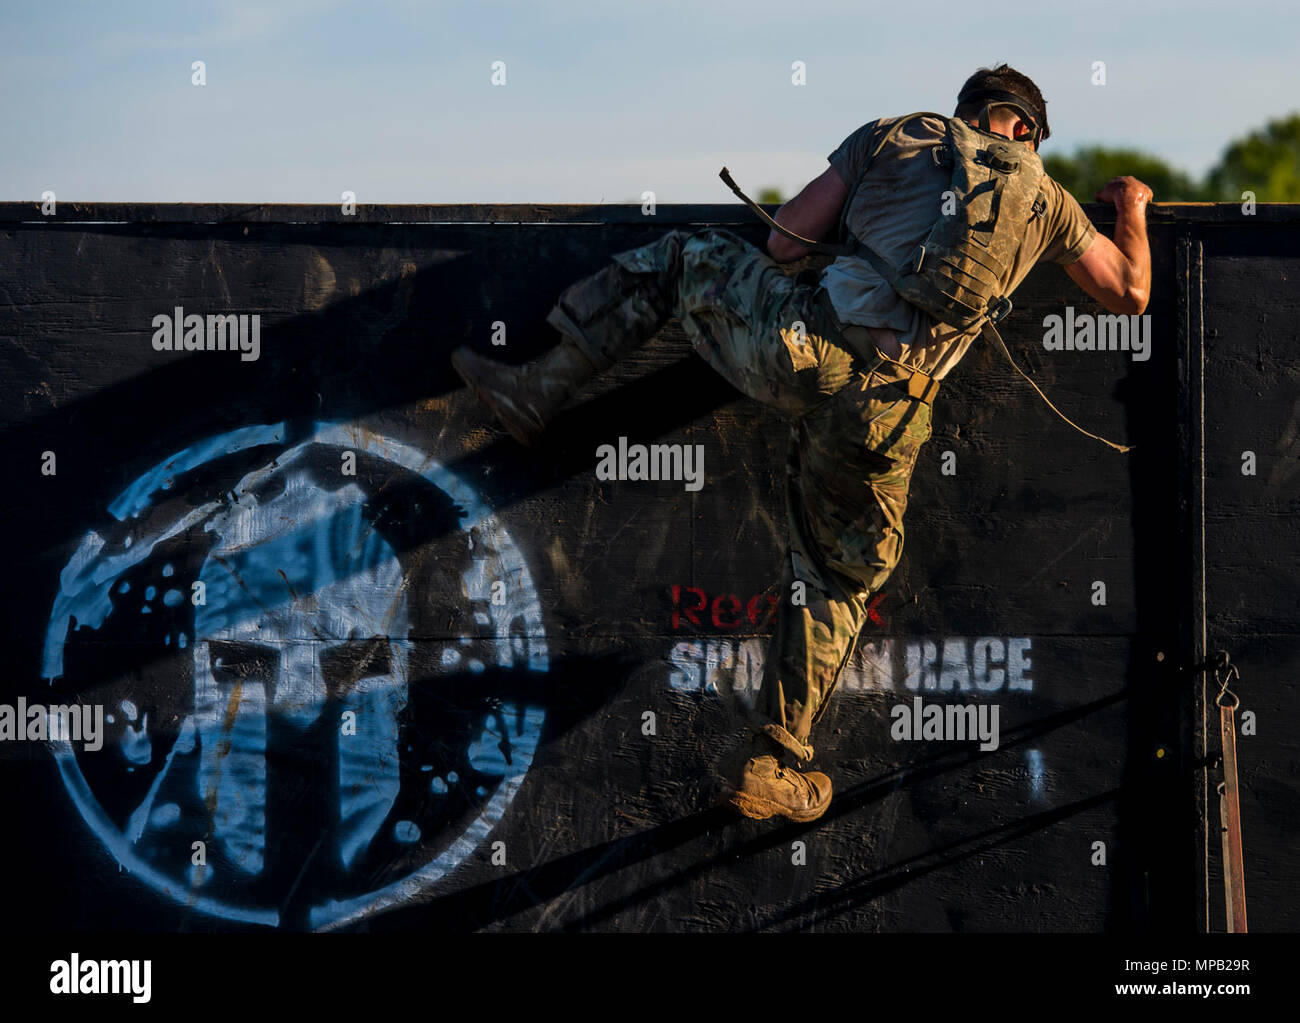 U.S. Army Rangers climb off an obstacle during a Spartan Race at the Best Ranger Competition 2017 in Fort Mitchell, Ala., April 8, 2017. The 34th annual David E. Grange Jr. Best Ranger Competition 2017 is a three-day event consisting of challenges to test competitor's physical, mental, and technical capabilities. Stock Photo